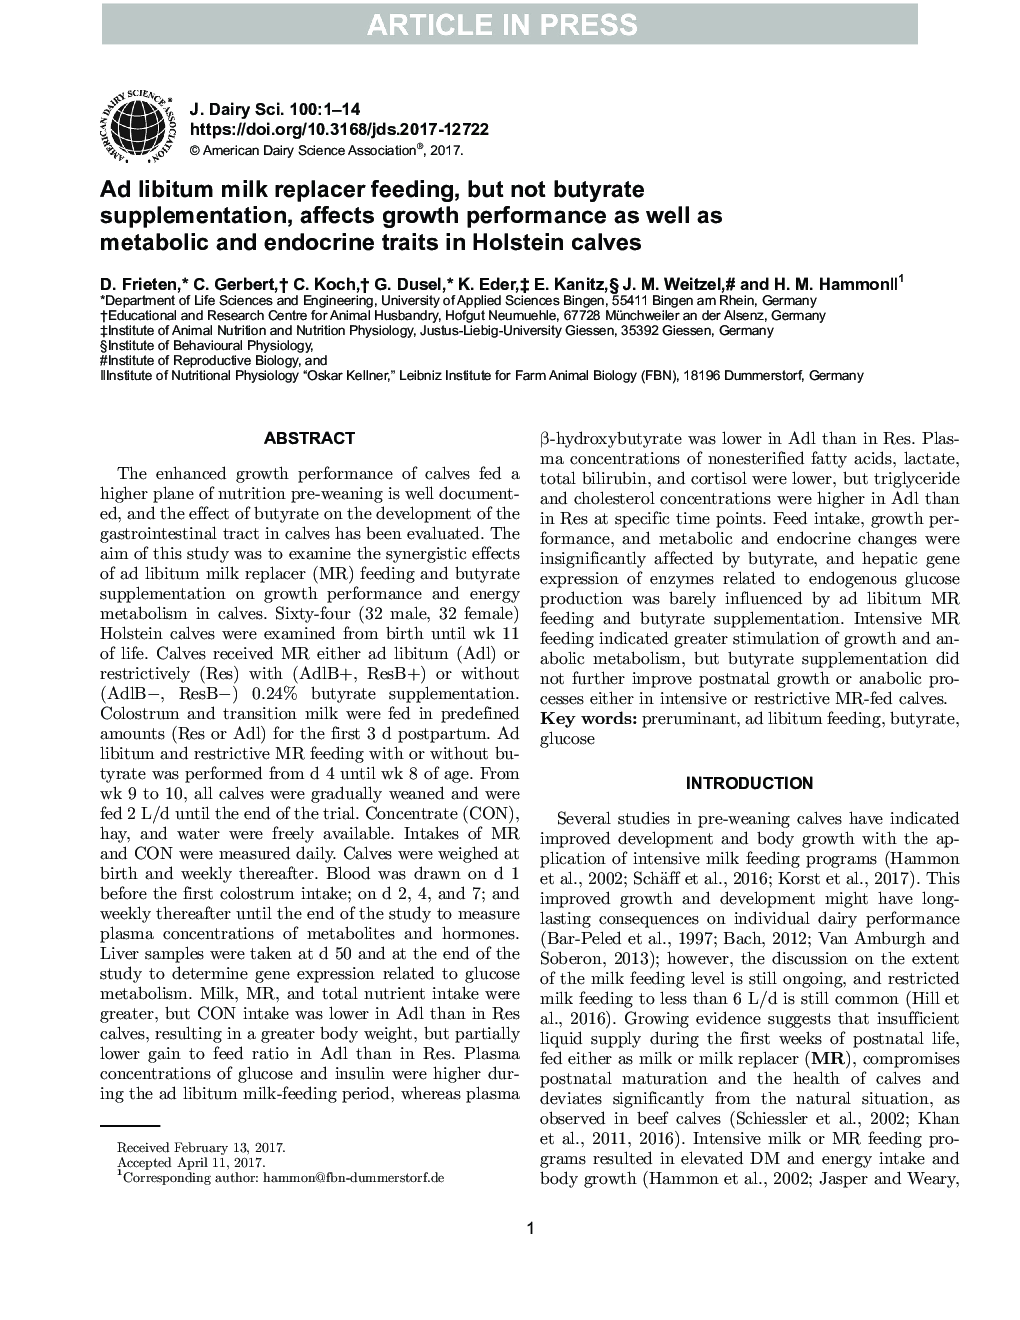 Ad libitum milk replacer feeding, but not butyrate supplementation, affects growth performance as well as metabolic and endocrine traits in Holstein calves